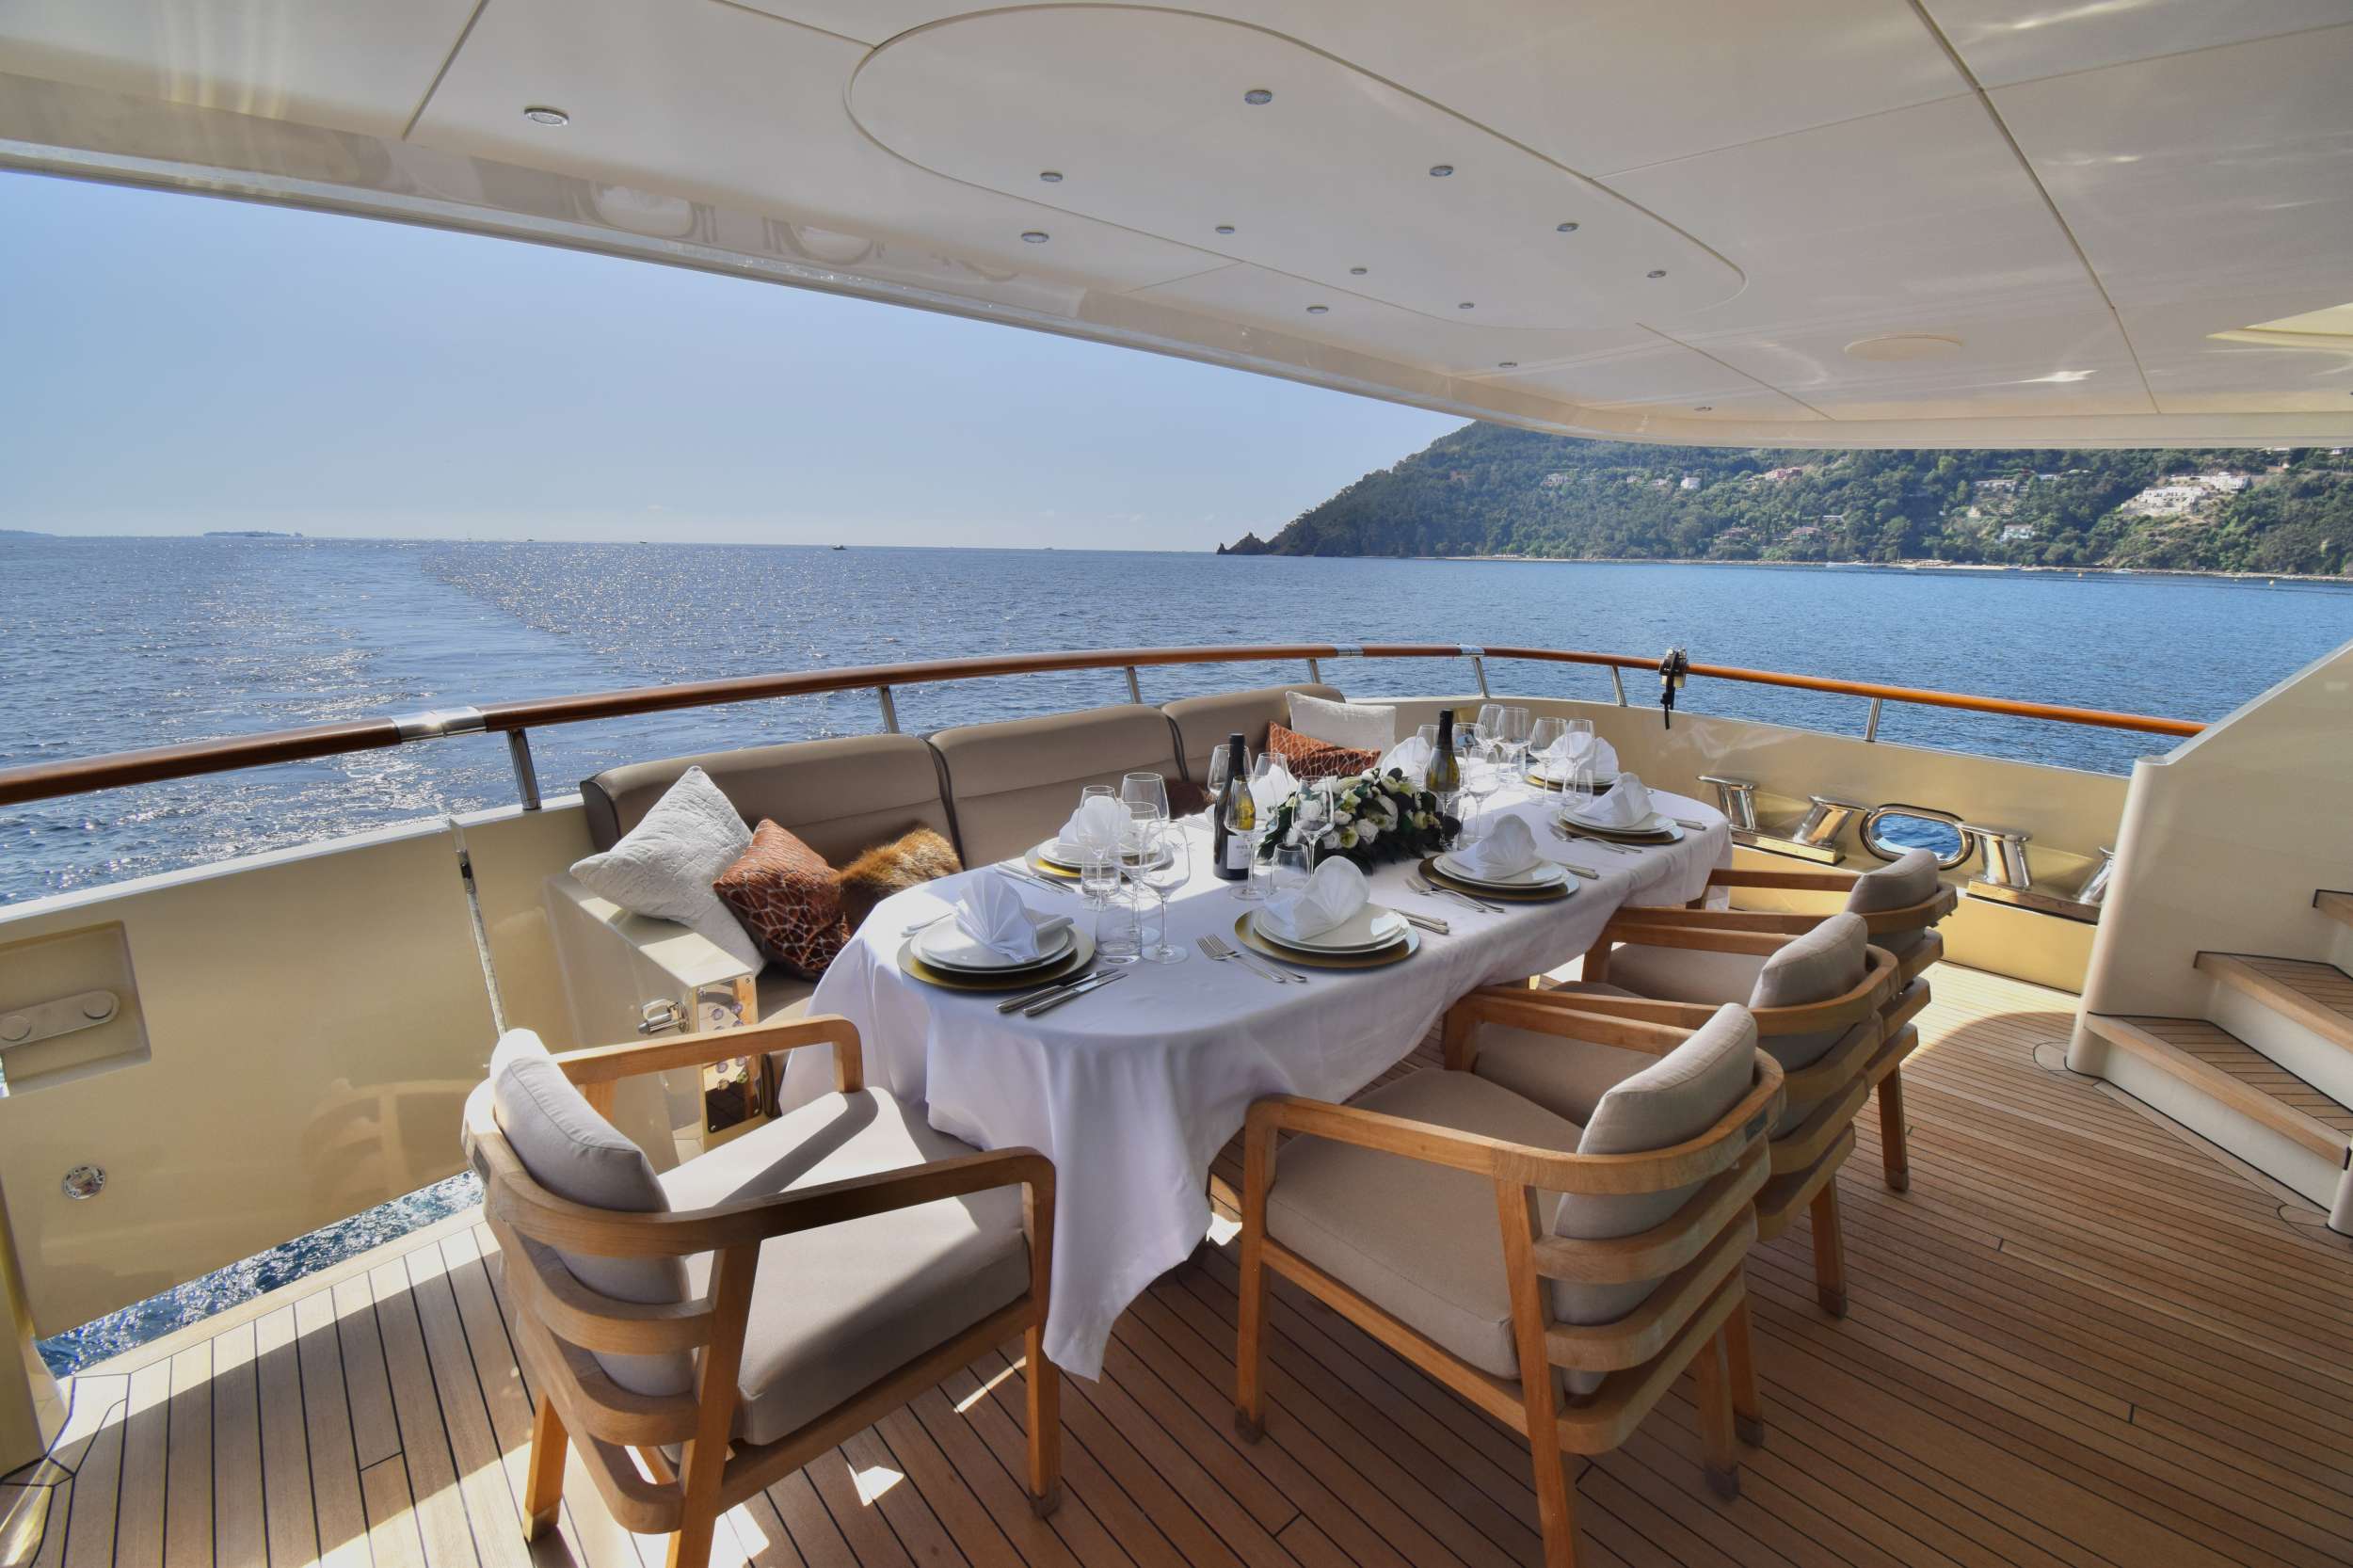 ORIZZONTE - Yacht Charter Vieste & Boat hire in W. Med -Naples/Sicily, W. Med -Riviera/Cors/Sard., W. Med - Spain/Balearics 3